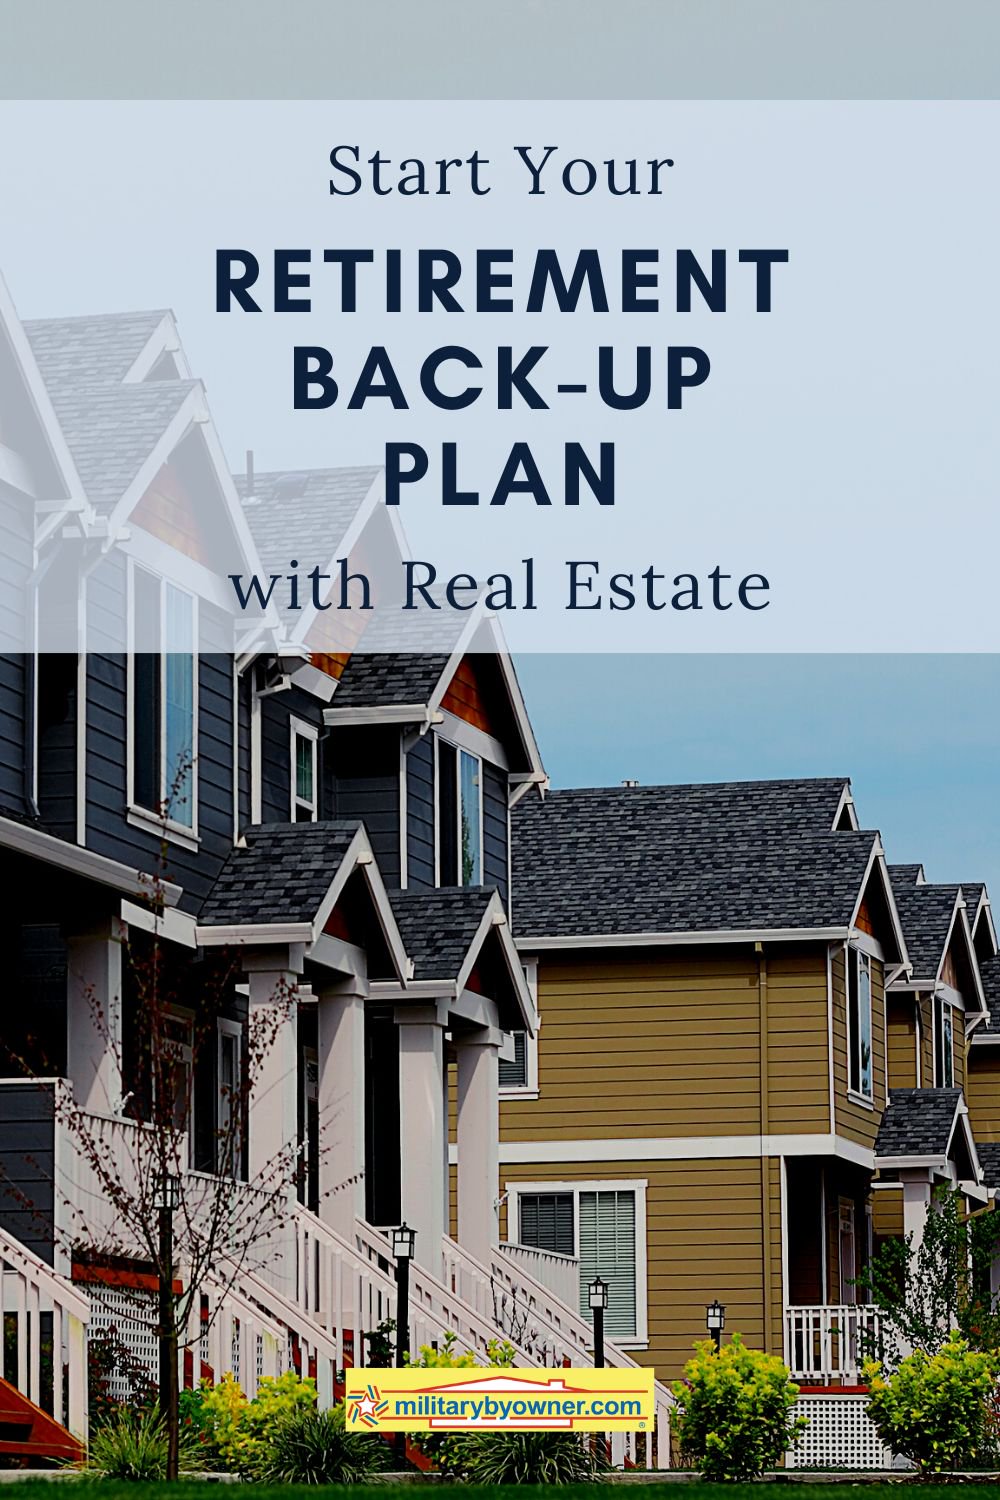 Resource_Start_Your_Retirement_Back-Up_Plan_with_Real_Estate